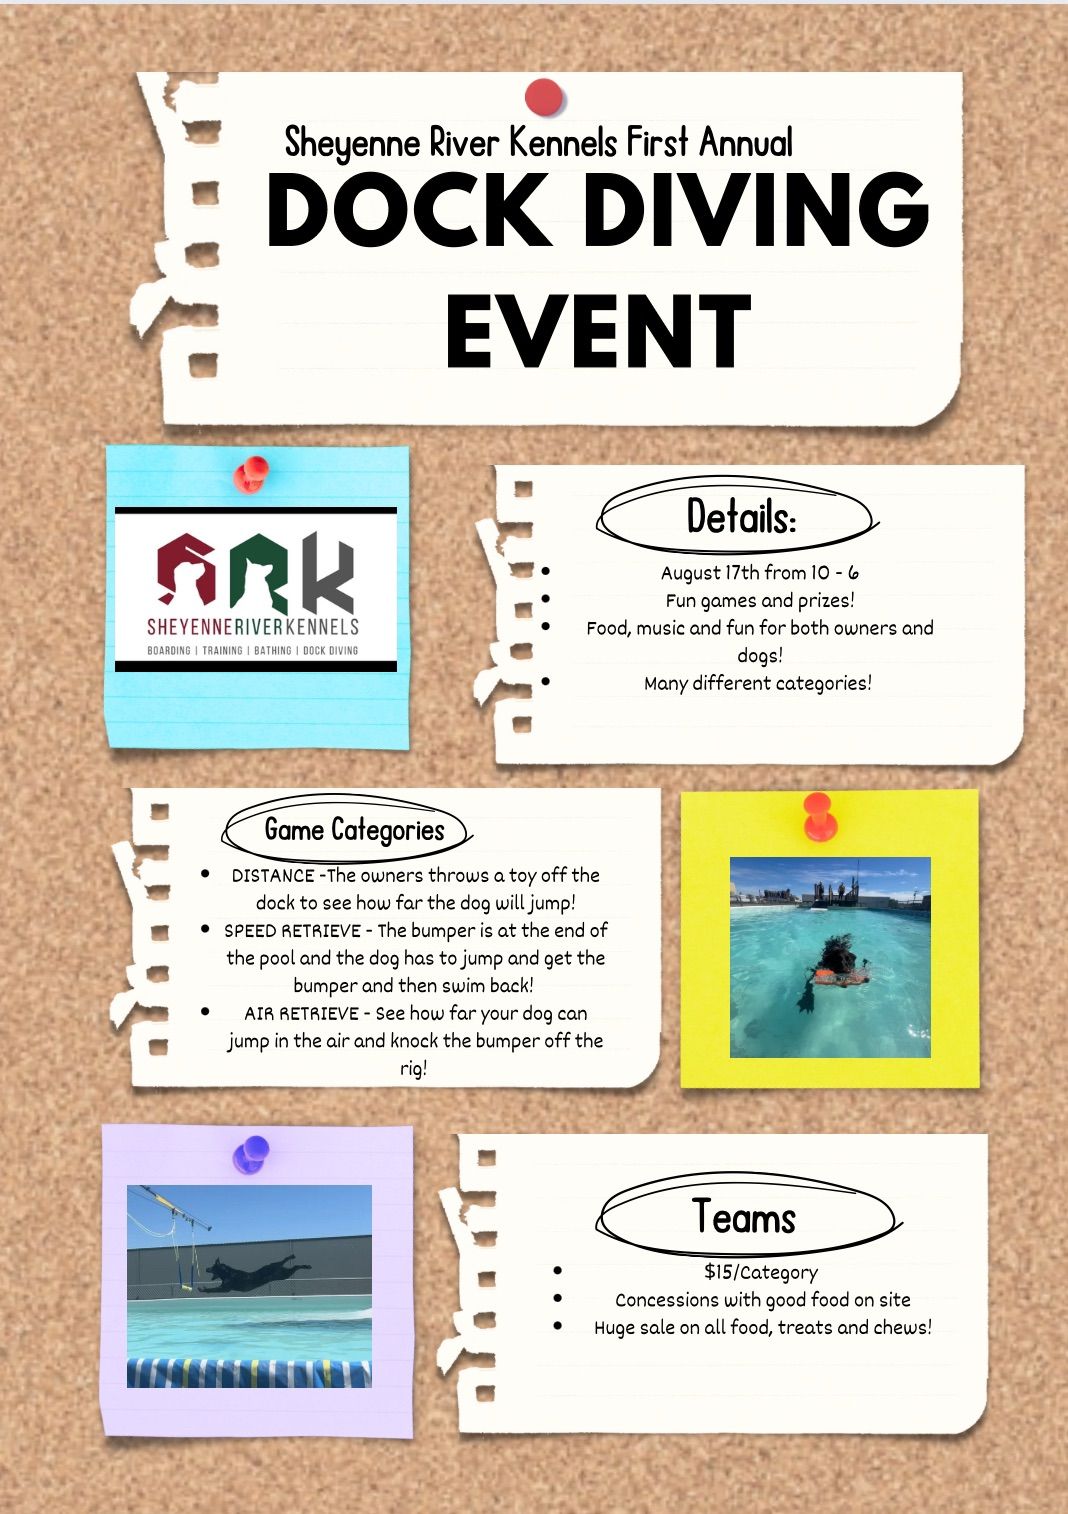 SHEYENNE RIVER KENNELS FIRST ANNUAL DOCK DIVING EVENT